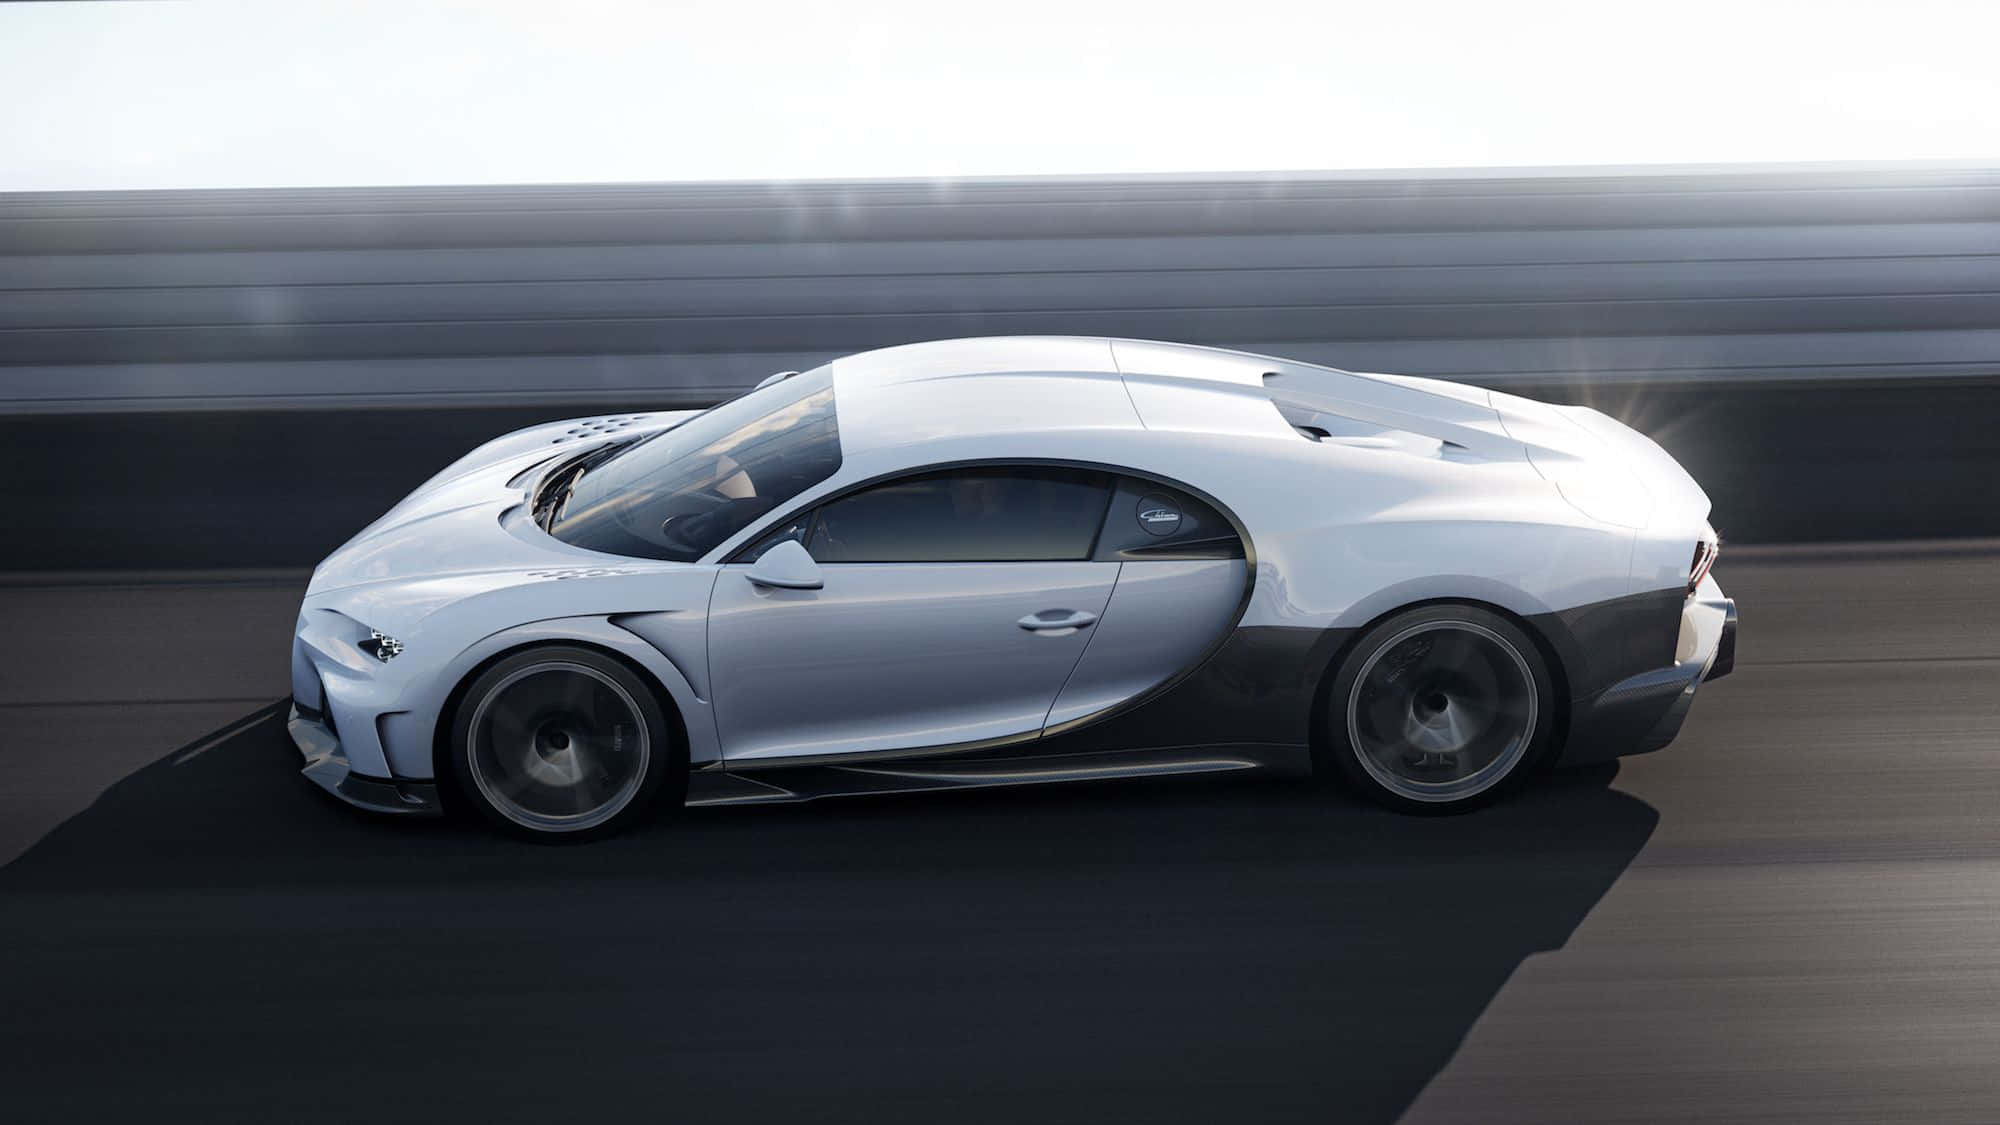 The Bugatti Chiron Is Driving On A Track